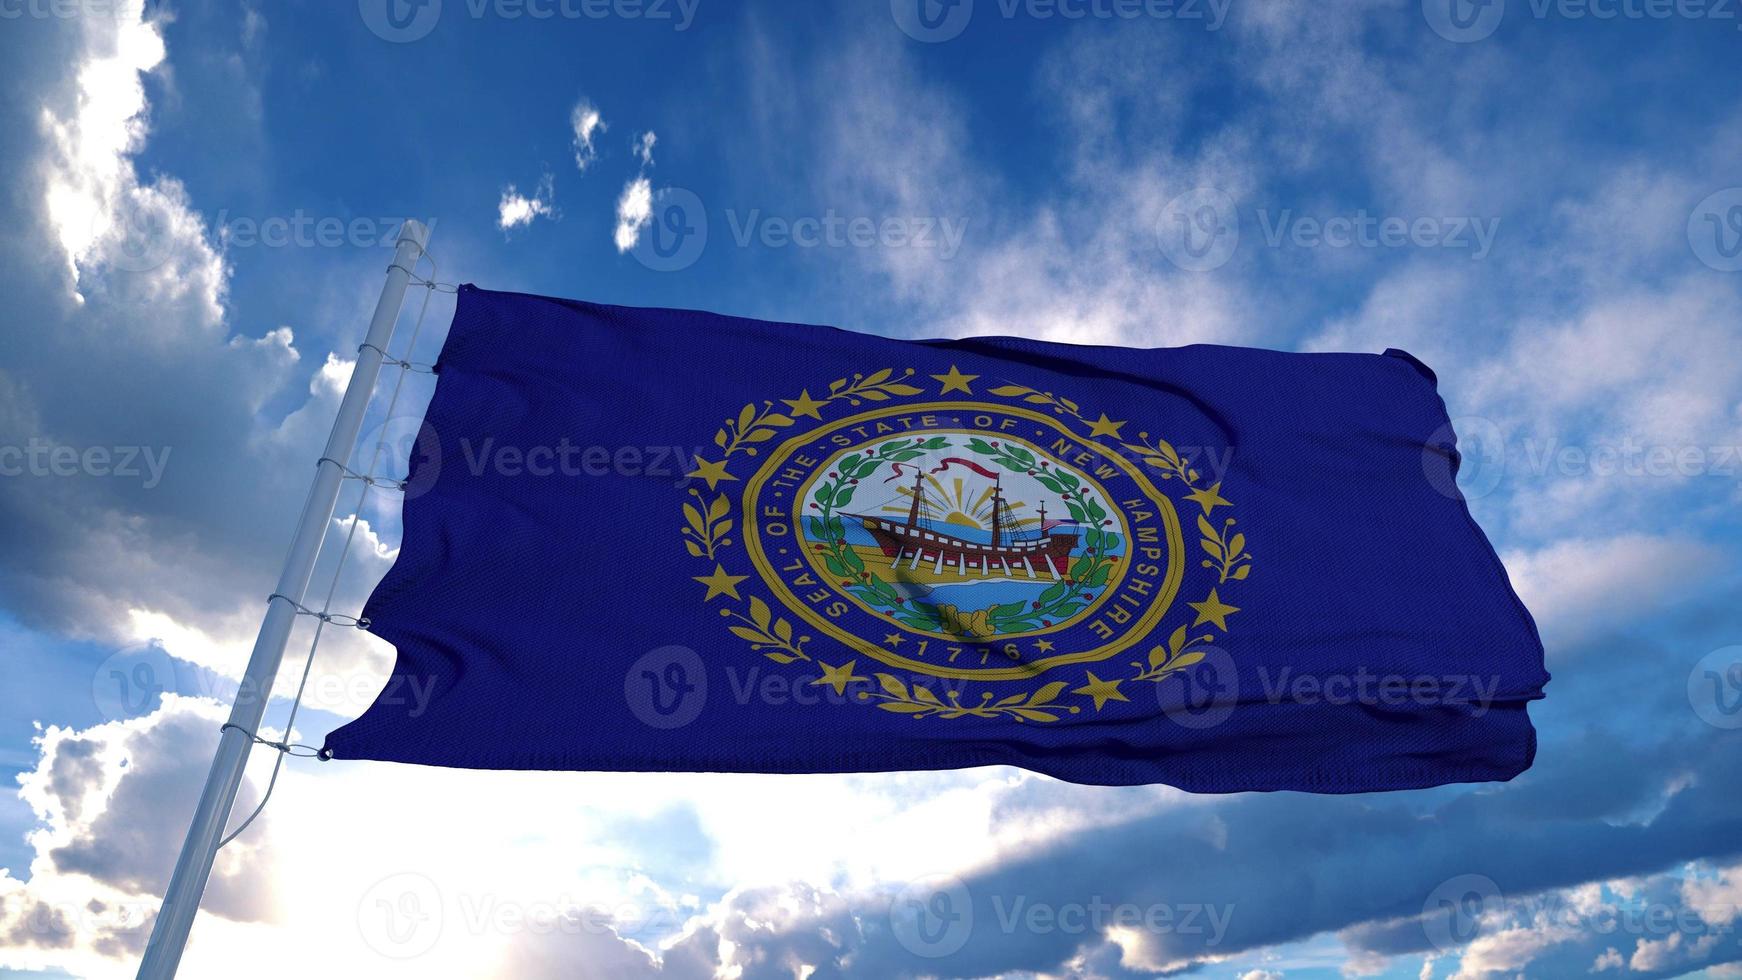 New Hampshire flag on a flagpole waving in the wind, blue sky background. 3d rendering photo